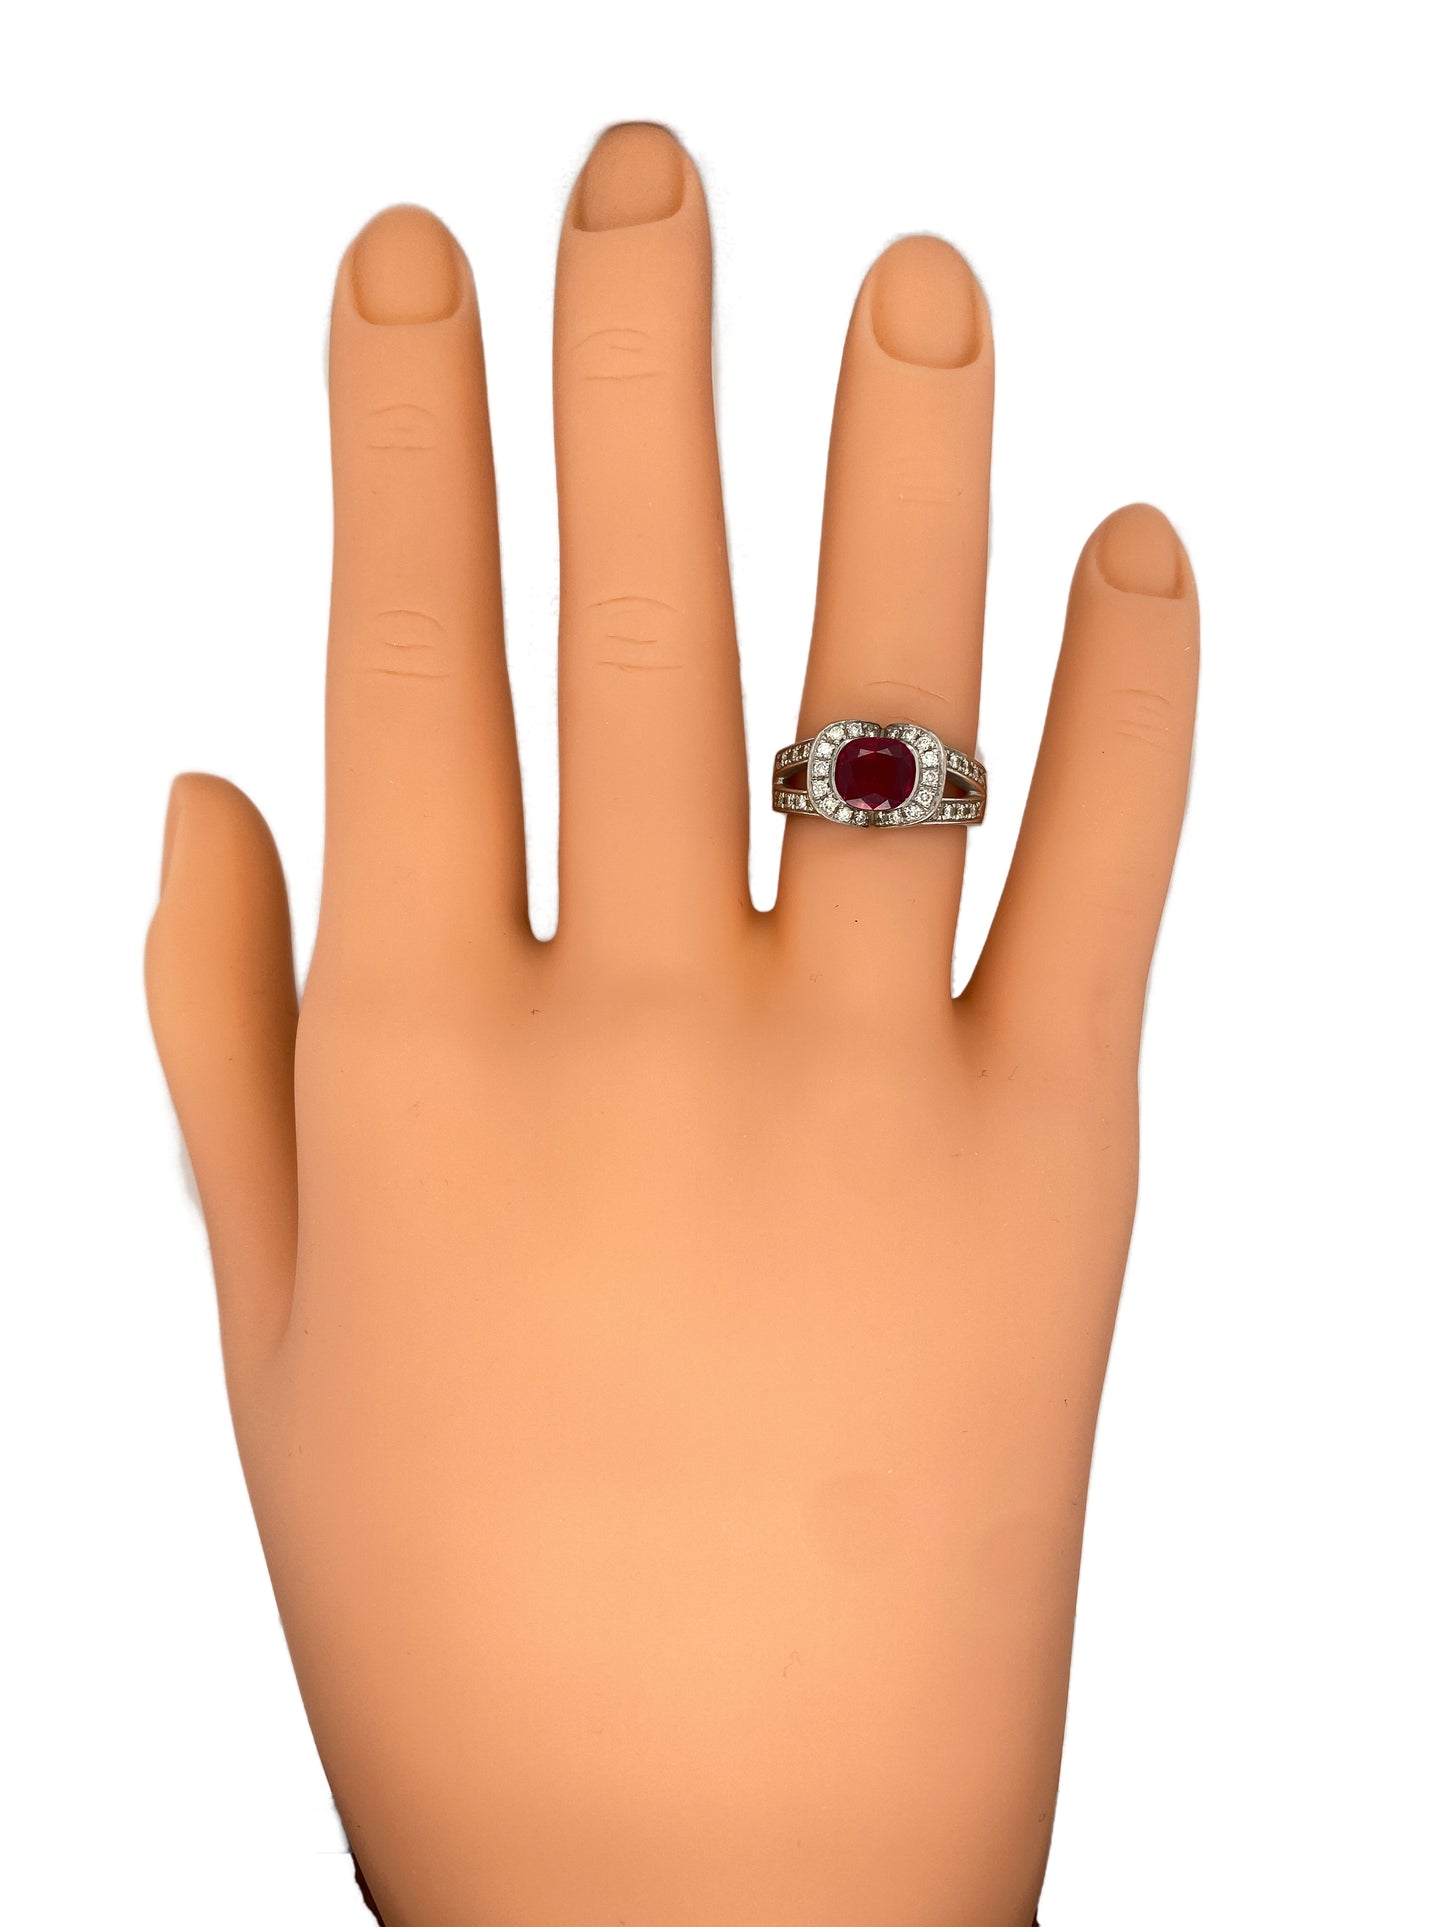 Circa 1990s French 1.20 Carat Oval Ruby and Diamond Ring in Platinum